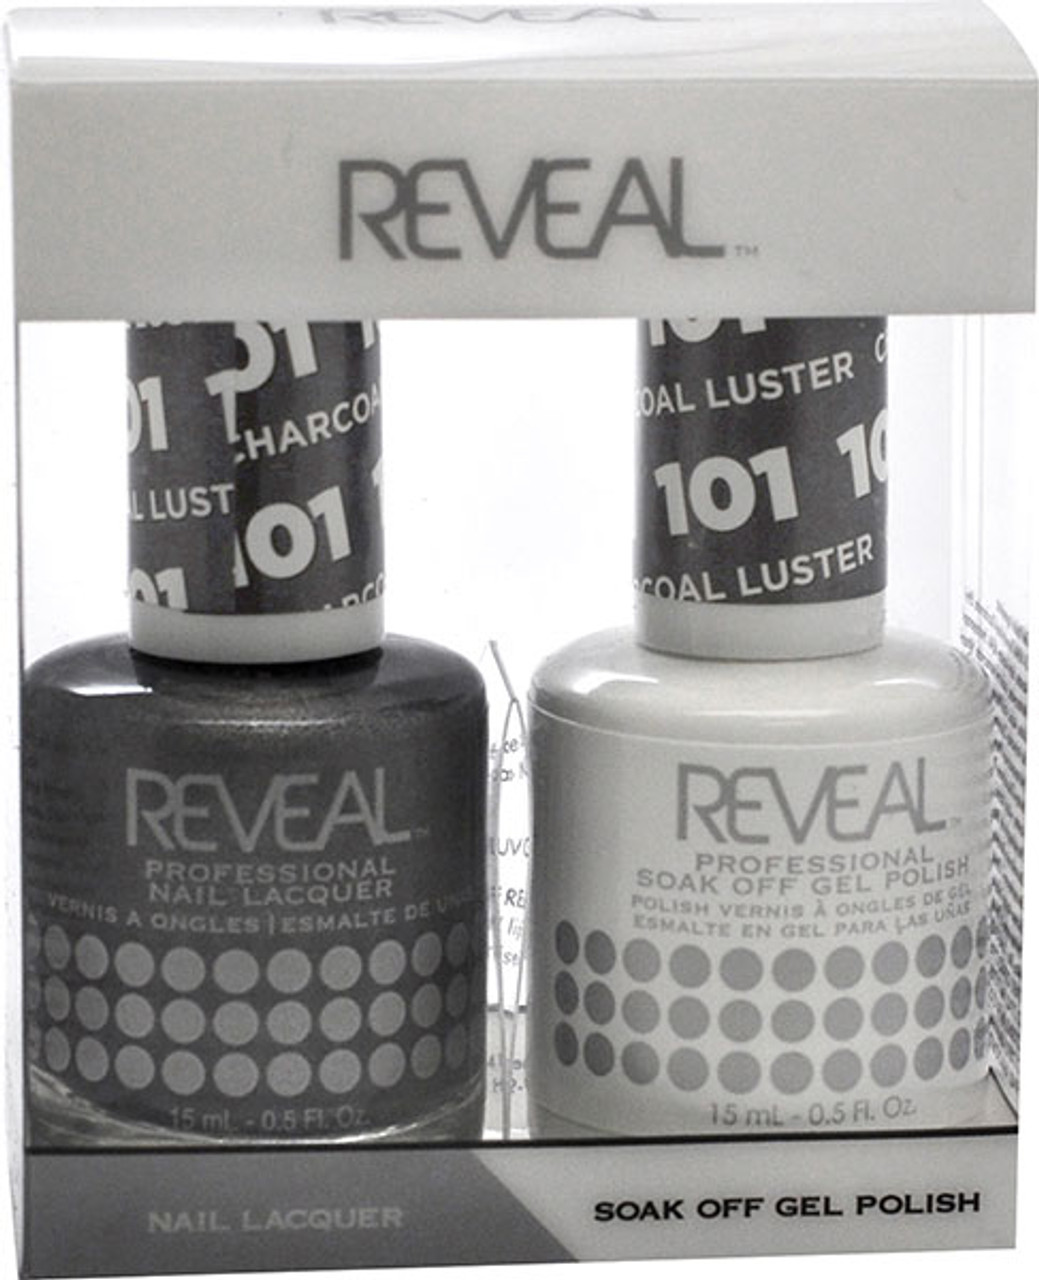 Reveal Gel Polish & Nail Lacquer Matching Duo - CHARCOAL LUSTER - .5 oz